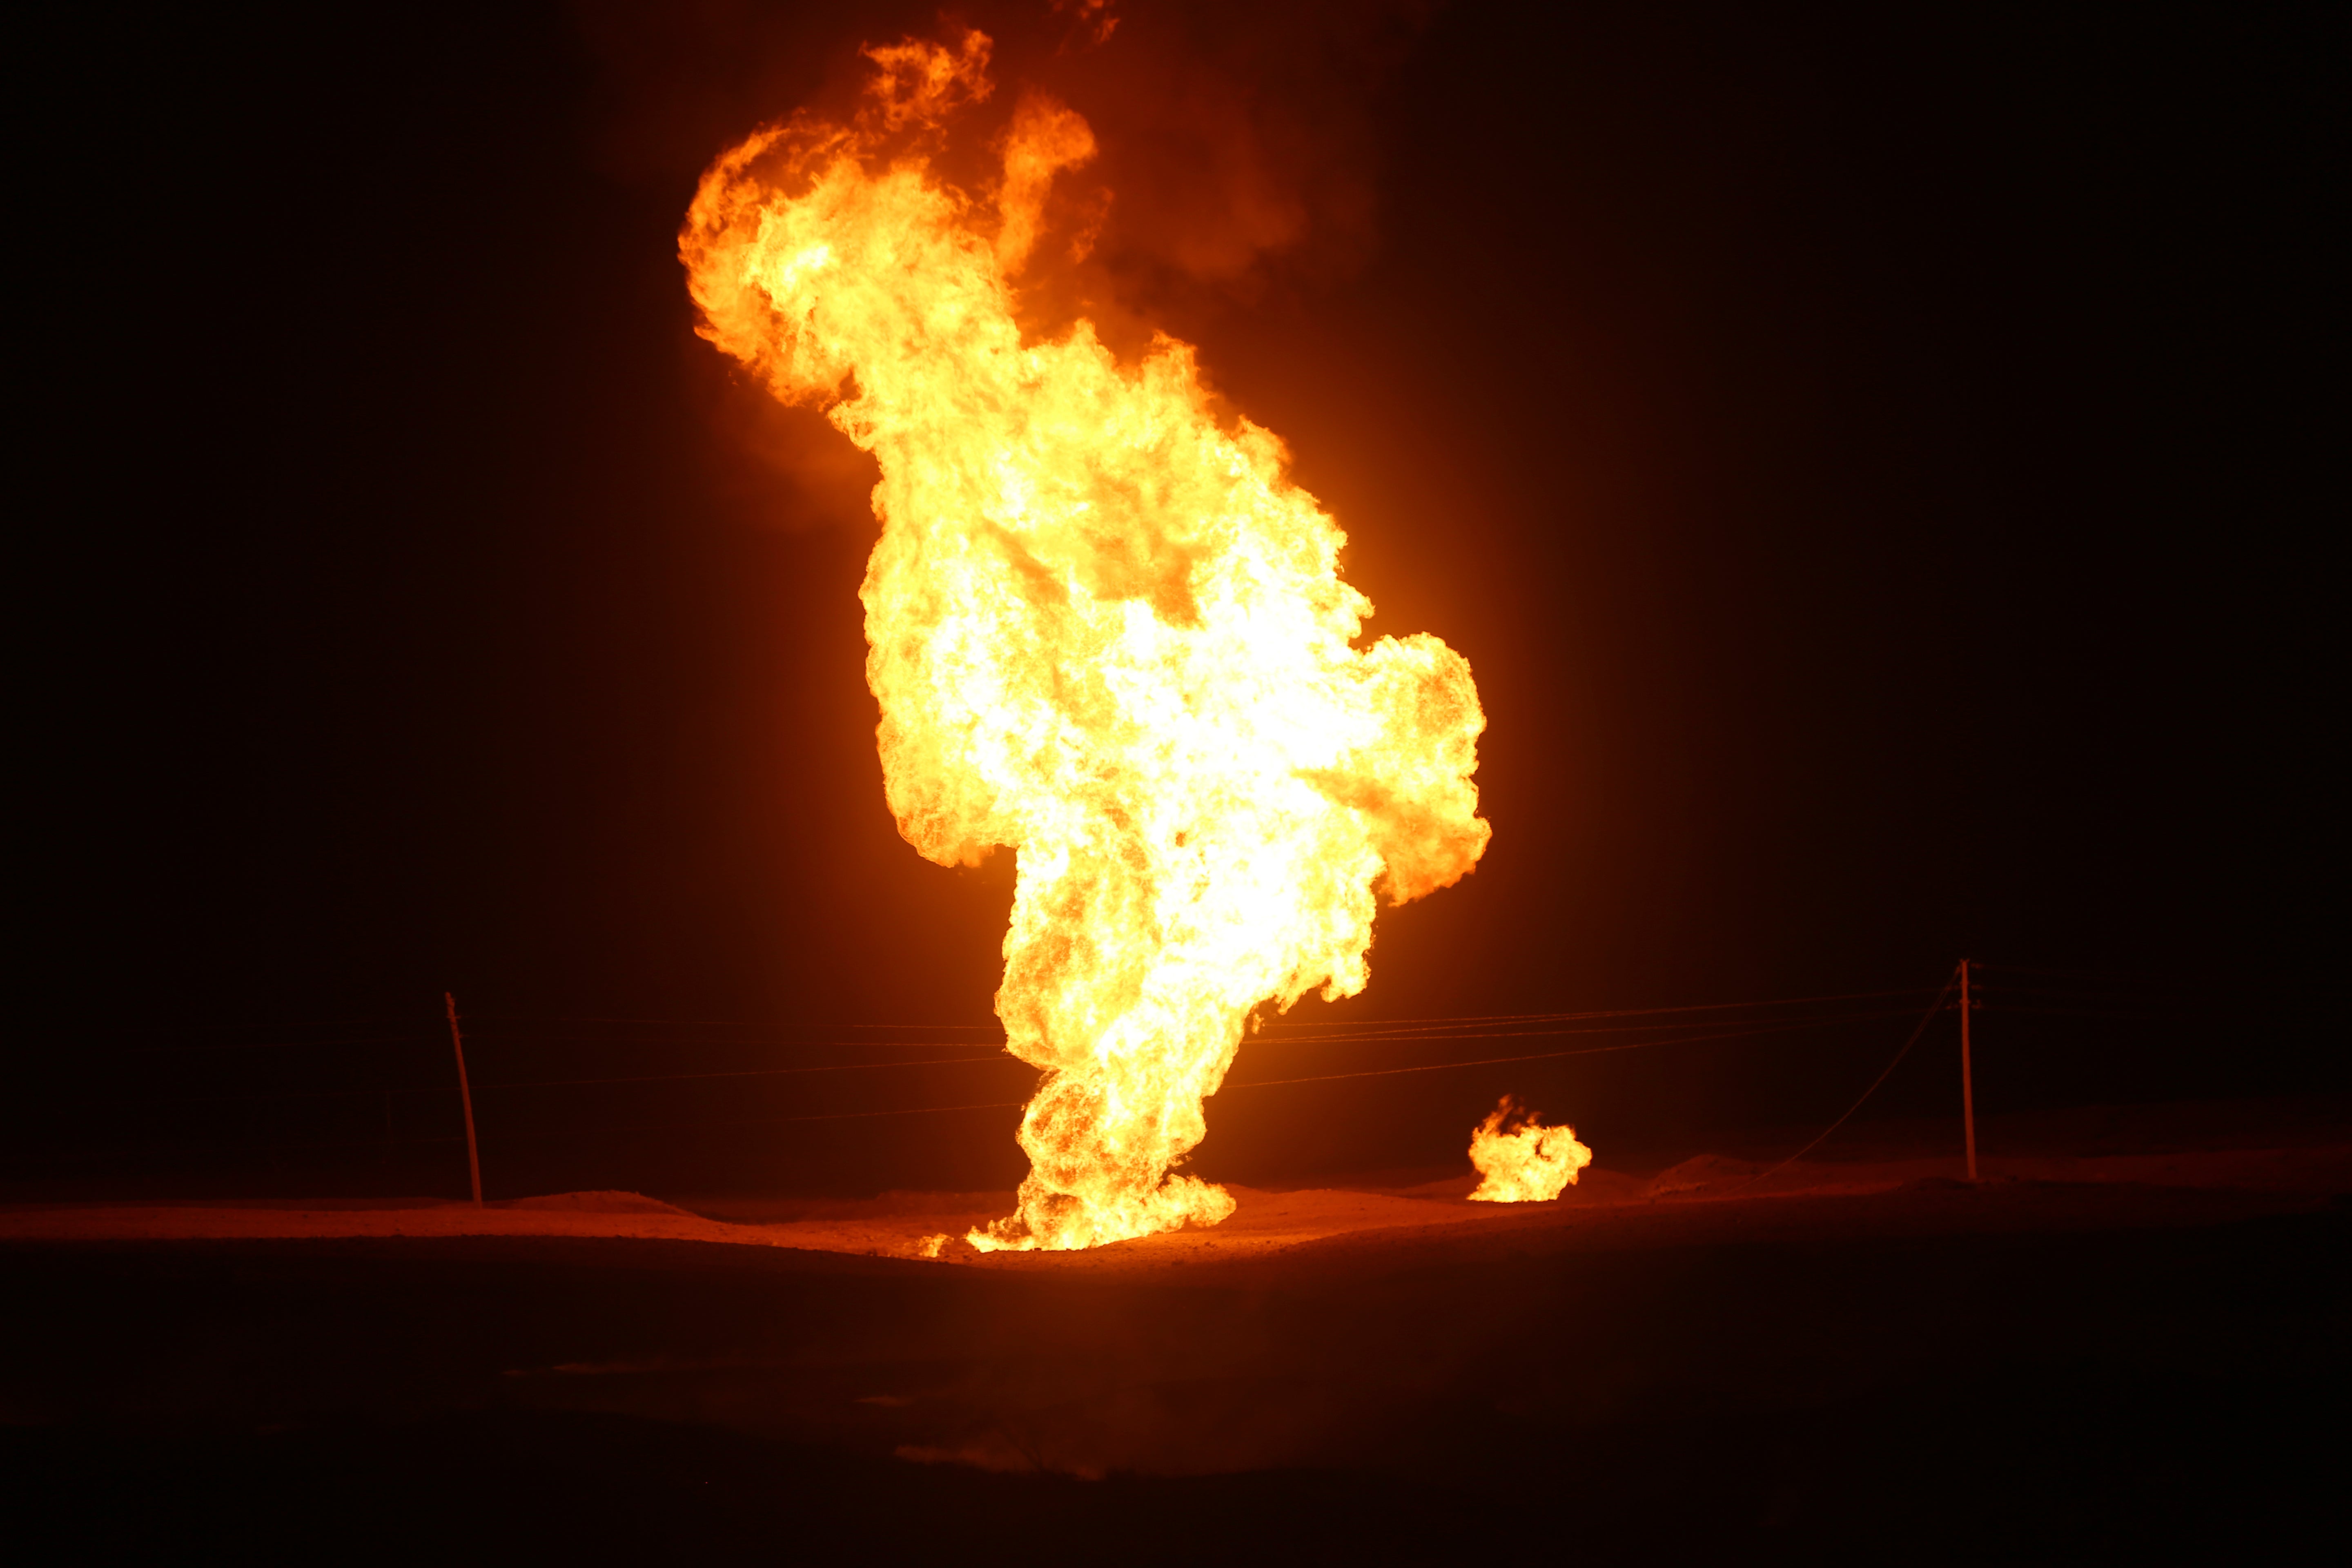 Flames leap into the air after a natural gas pipeline explodes outside the city of Boroujen